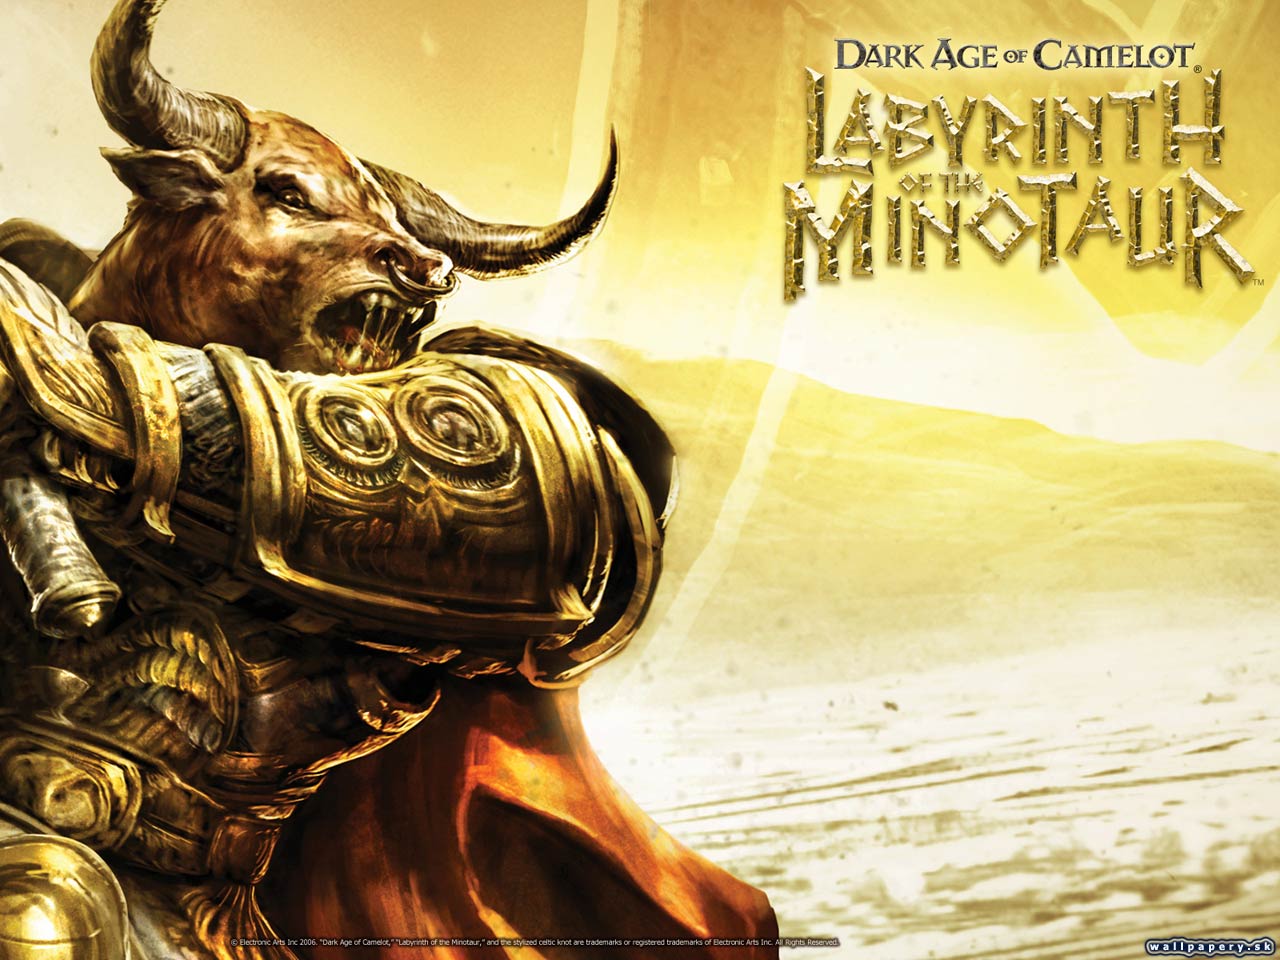 Dark Age of Camelot: Labyrinth of the Minotaur - wallpaper 2